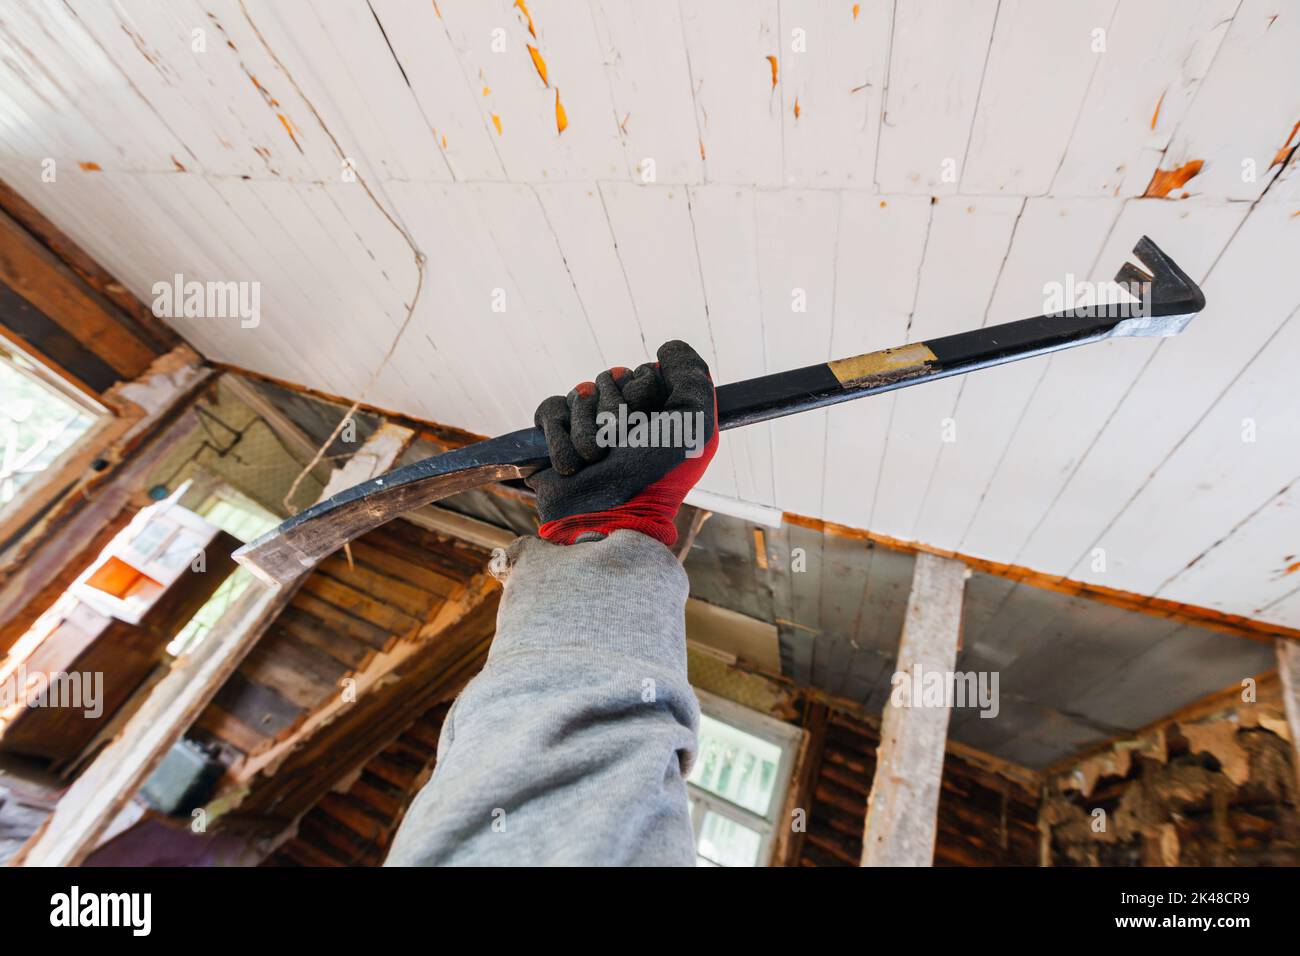 Black nail puller in male hand, house demolition is in progress Stock Photo